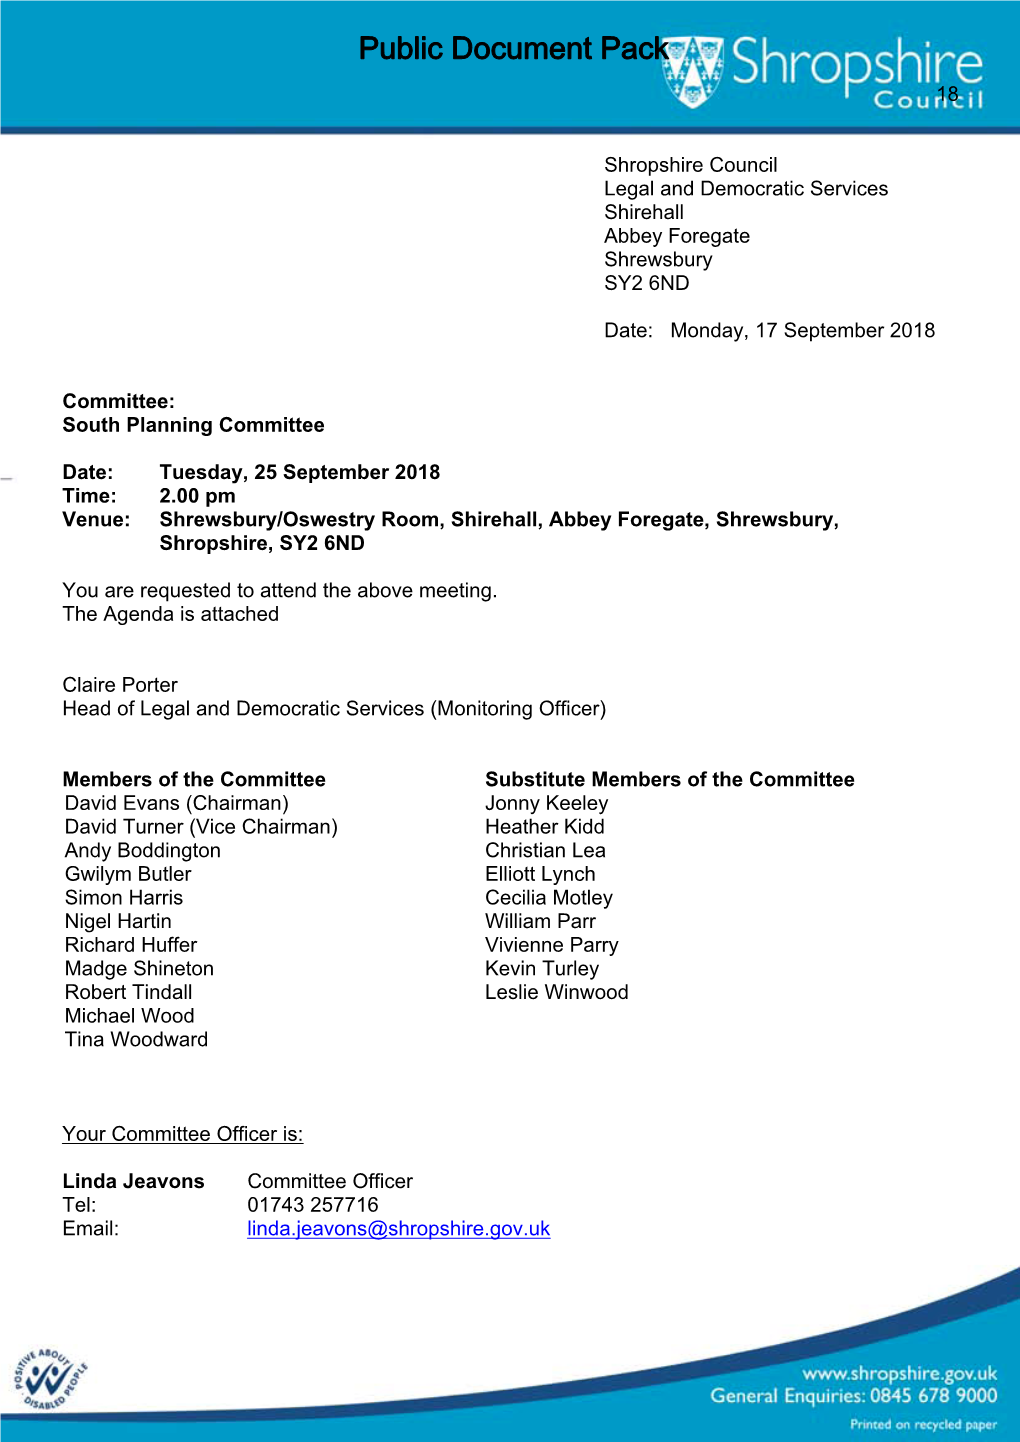 (Public Pack)Agenda Document for South Planning Committee, 25/09